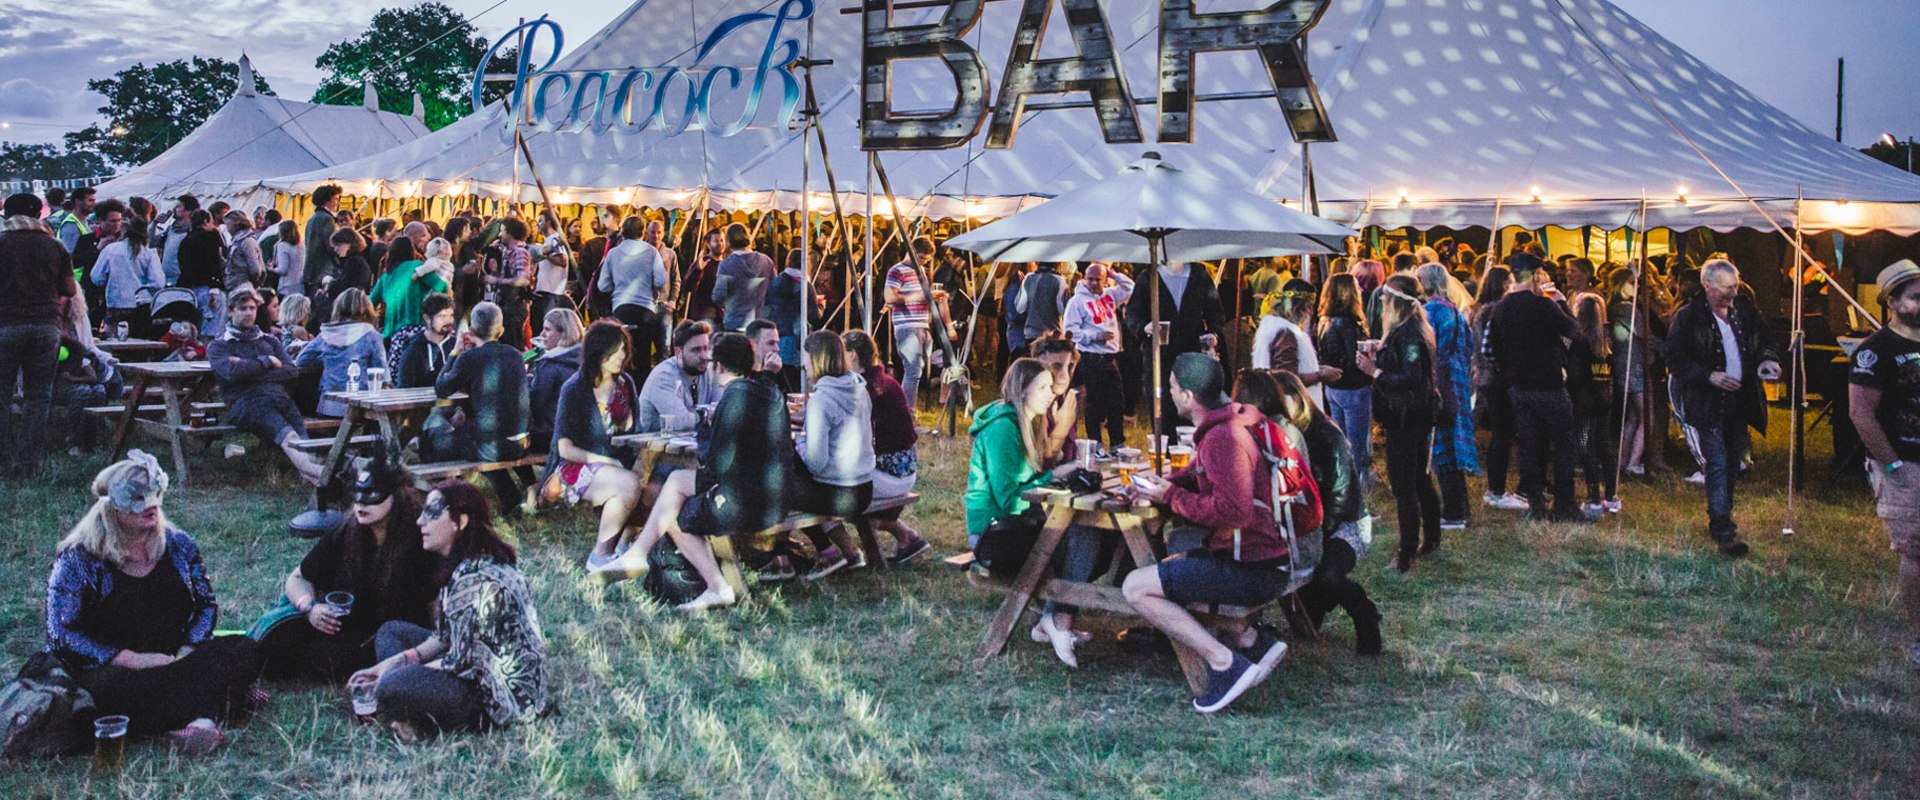 What kind of food and drinks are available at a music festival?